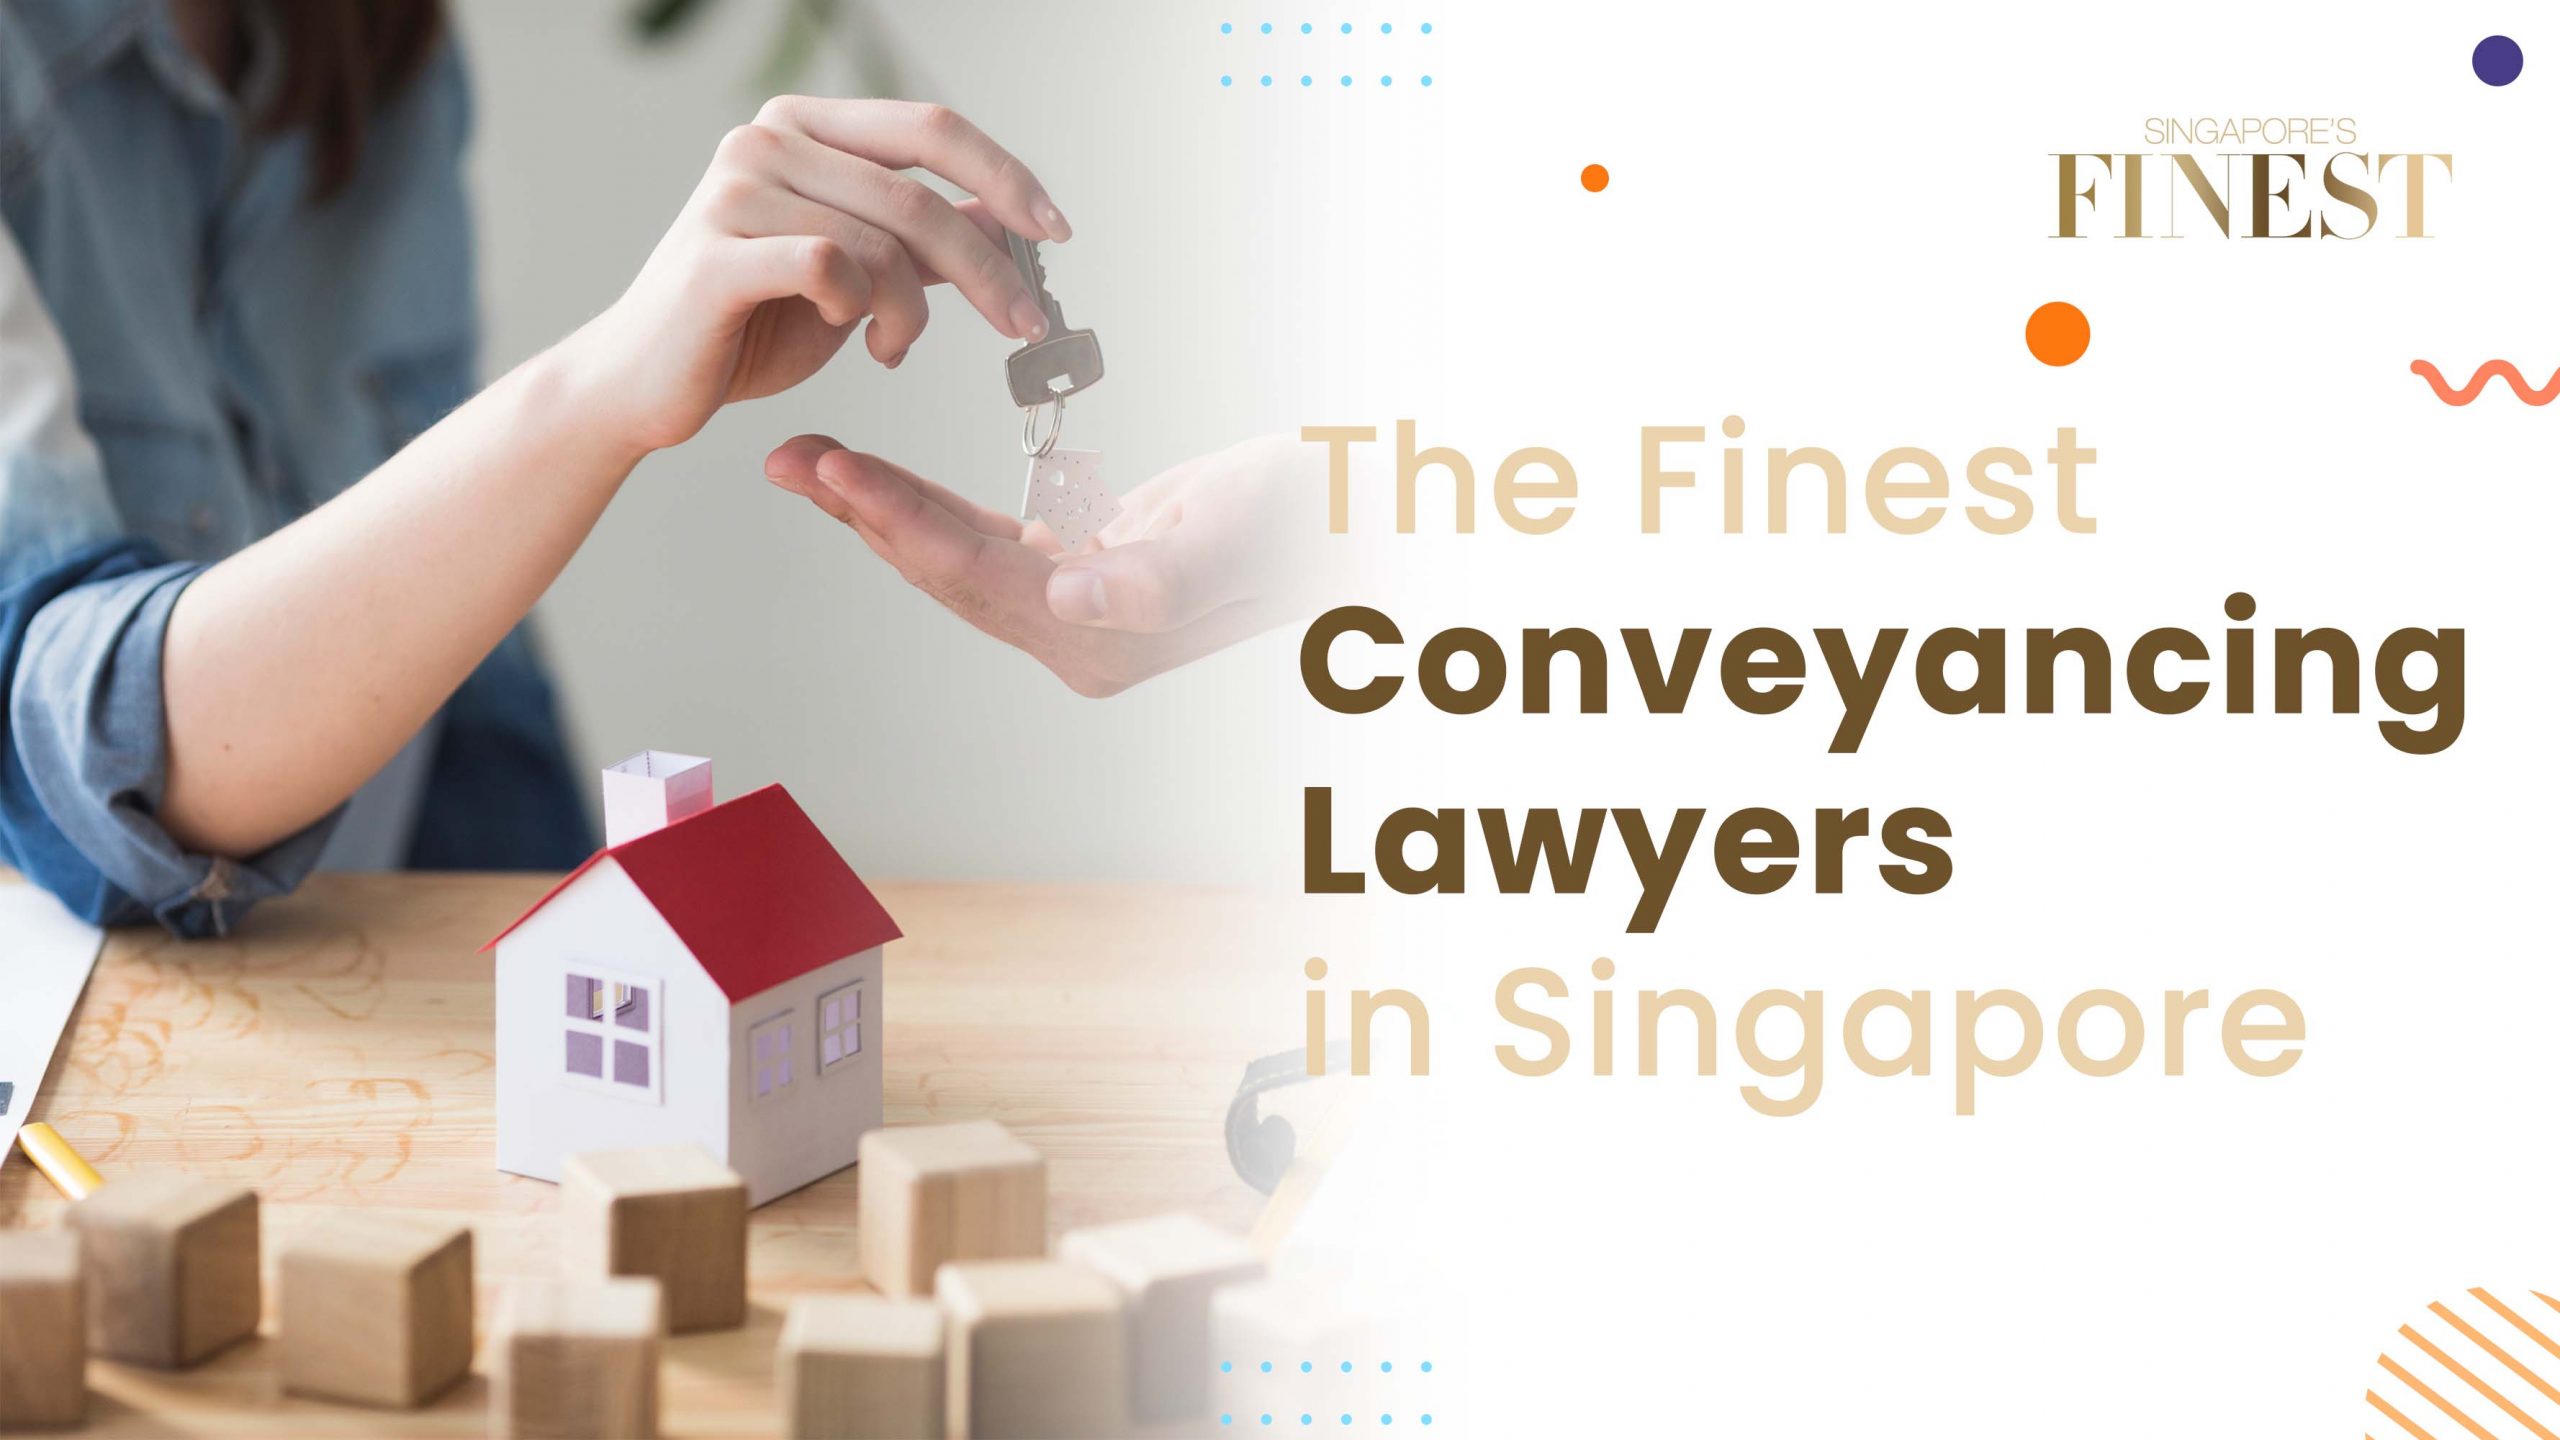 The Finest Conveyancing Lawyers in Singapore